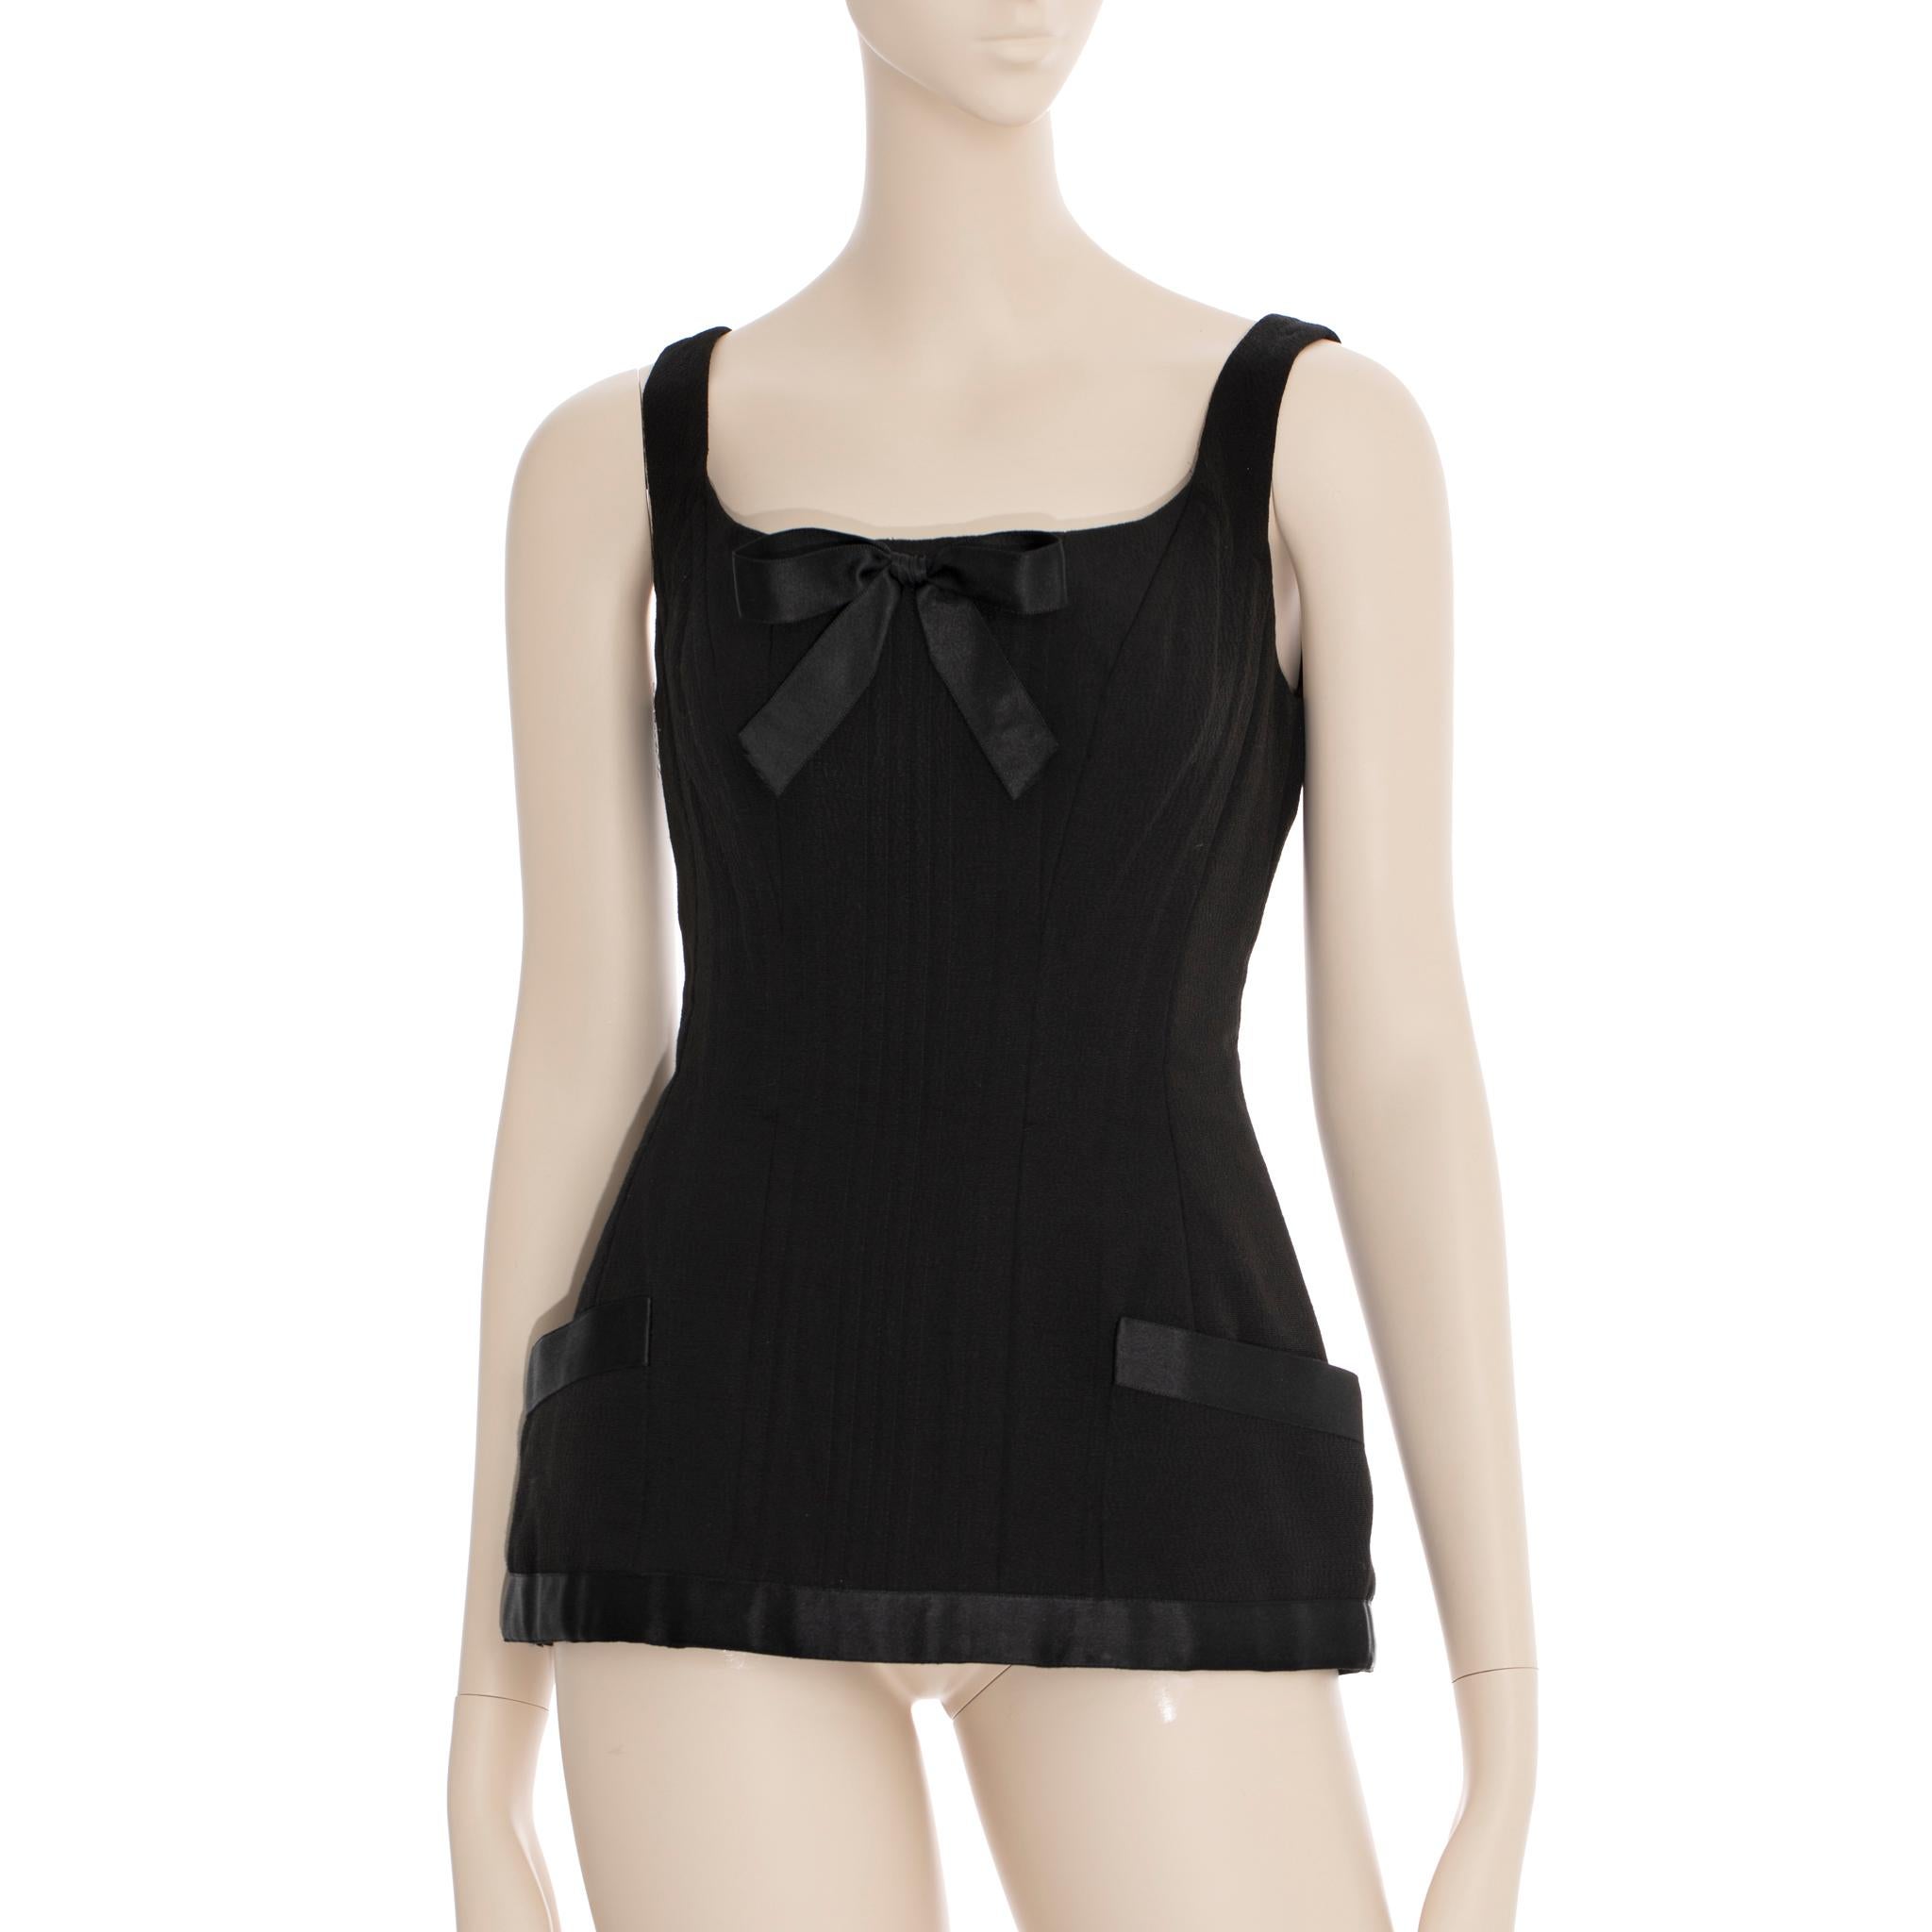 Rare black corset top from the Spring/Summer 1993 collection of Chanel. Supermodel Tatjana Patitz was infamous for donning one of Karl Lagerfeld's classic creations. This hourglass-shaped corset top is an heirloom-quality design that endures the